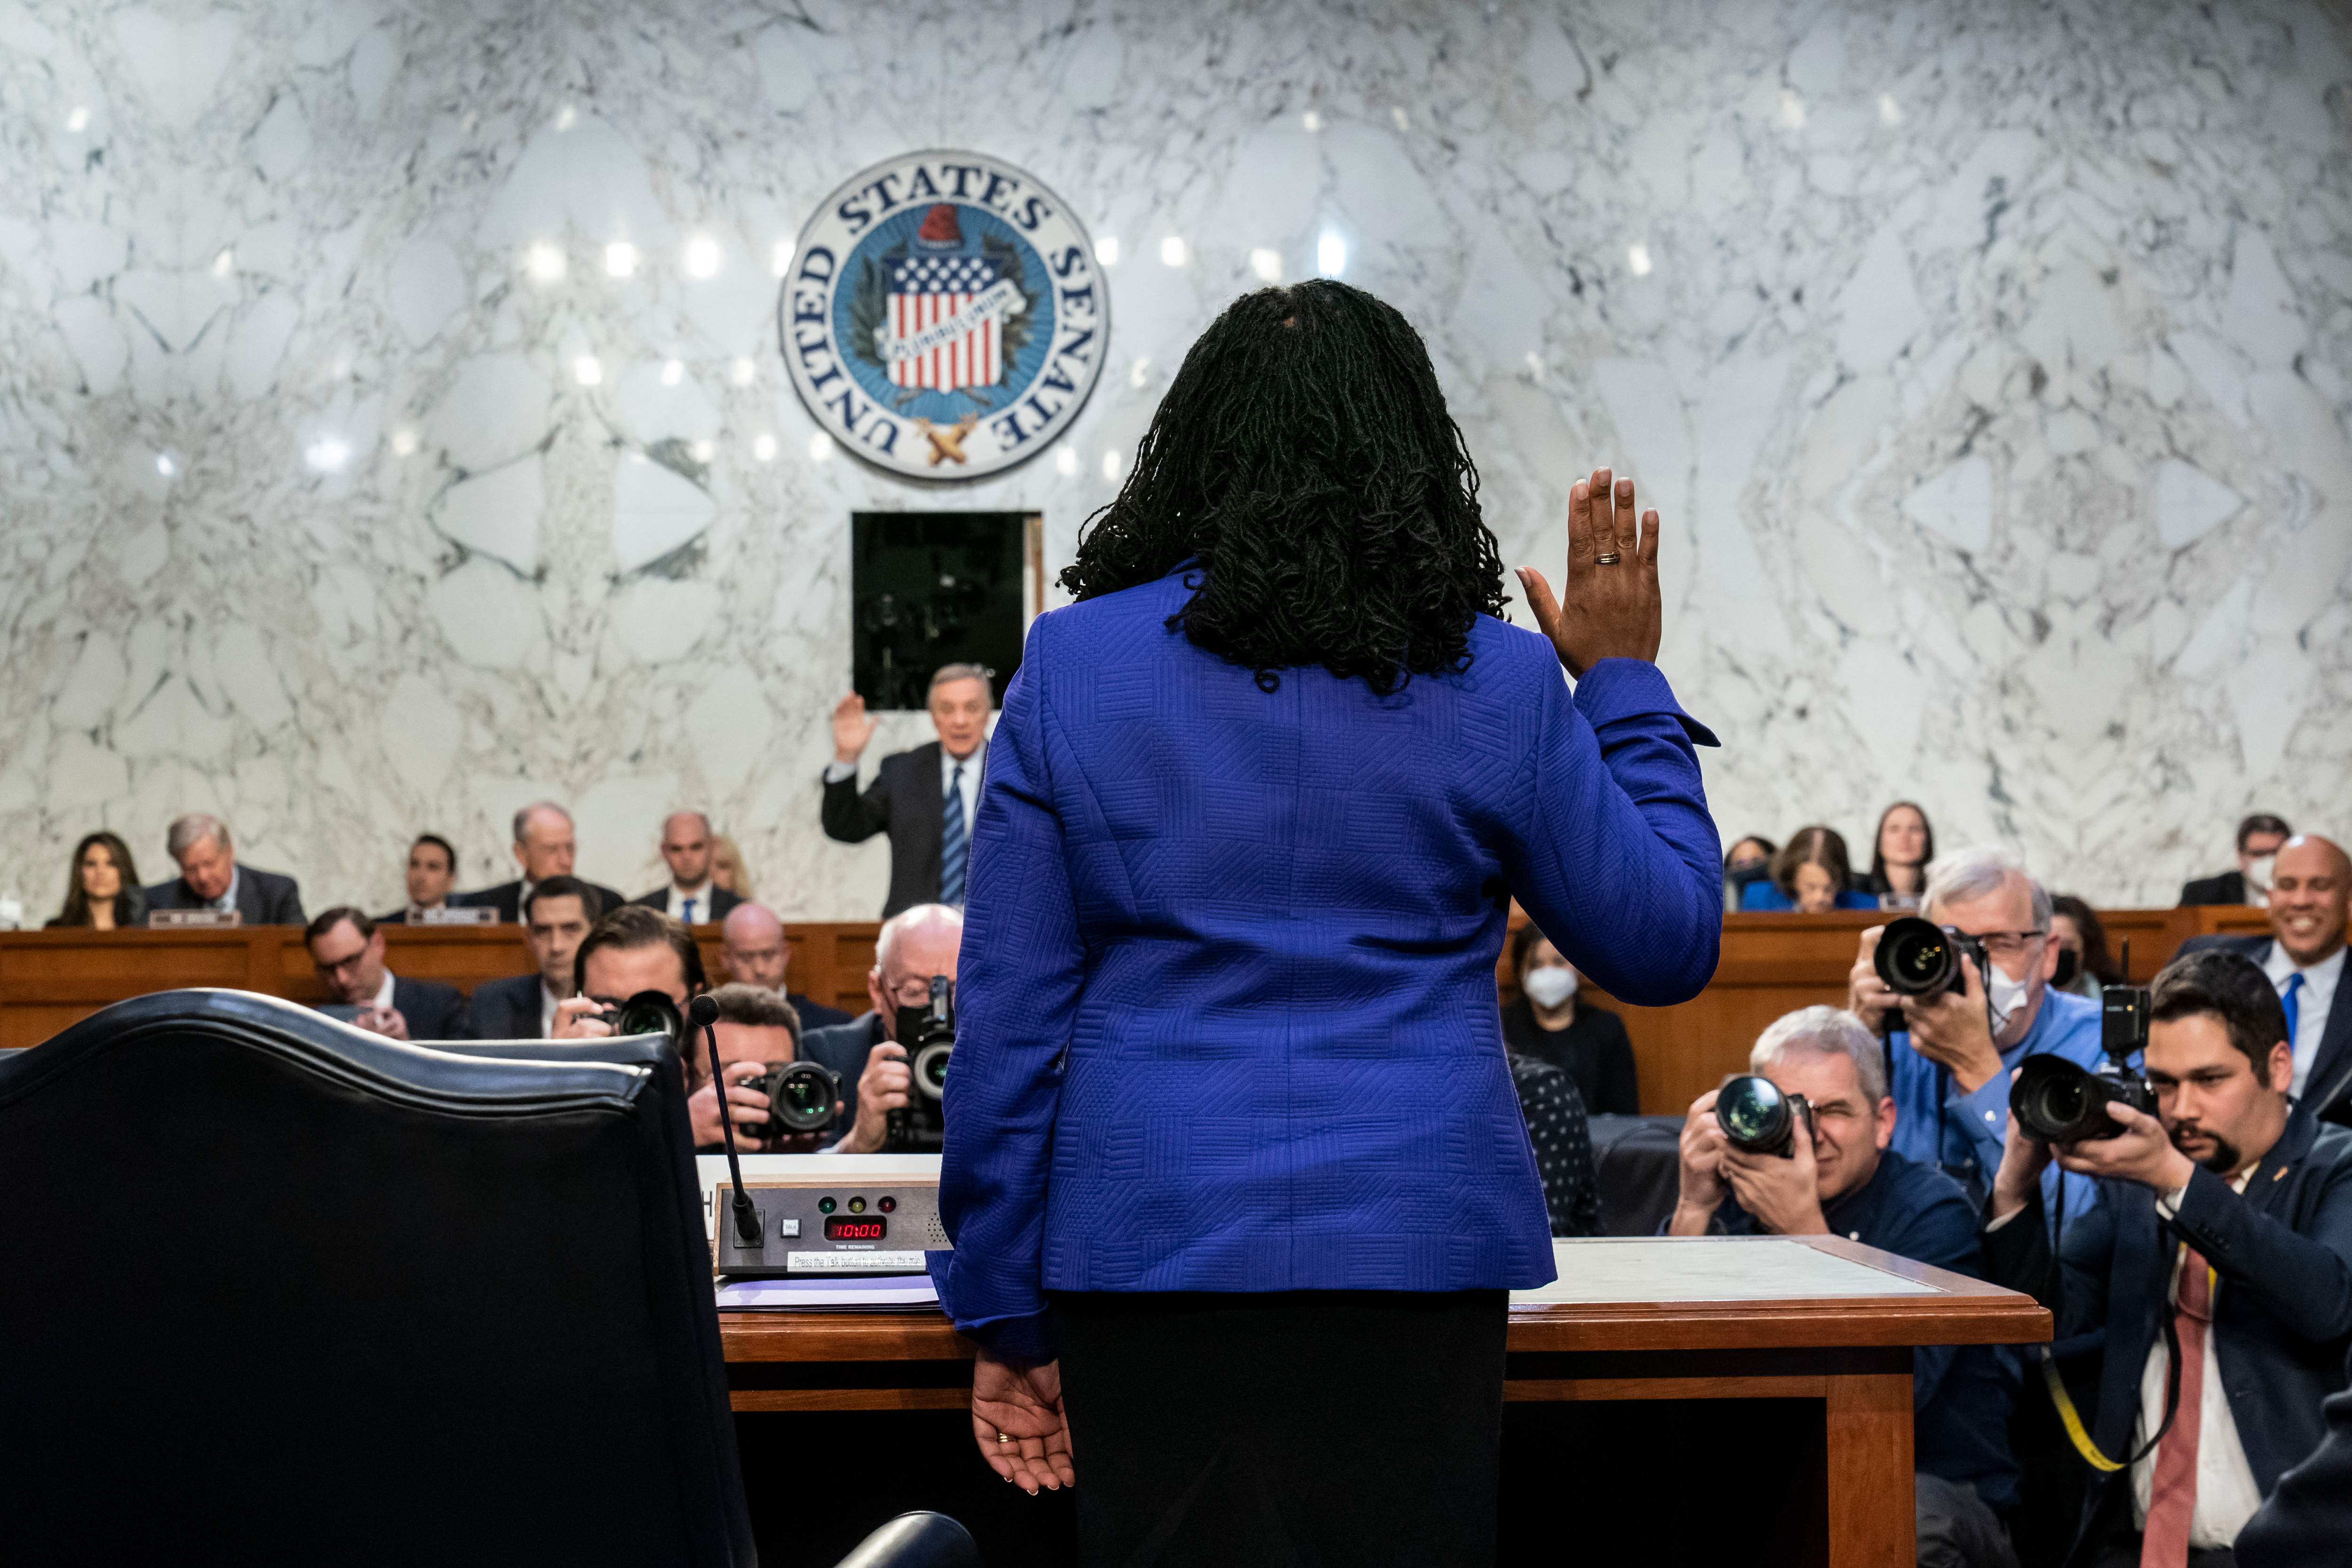 US Supreme Court nominee Ketanji Brown Jackson is sworn in by Senate Judiciary Committee chairChairman Dick Durbin on 21 March, 202